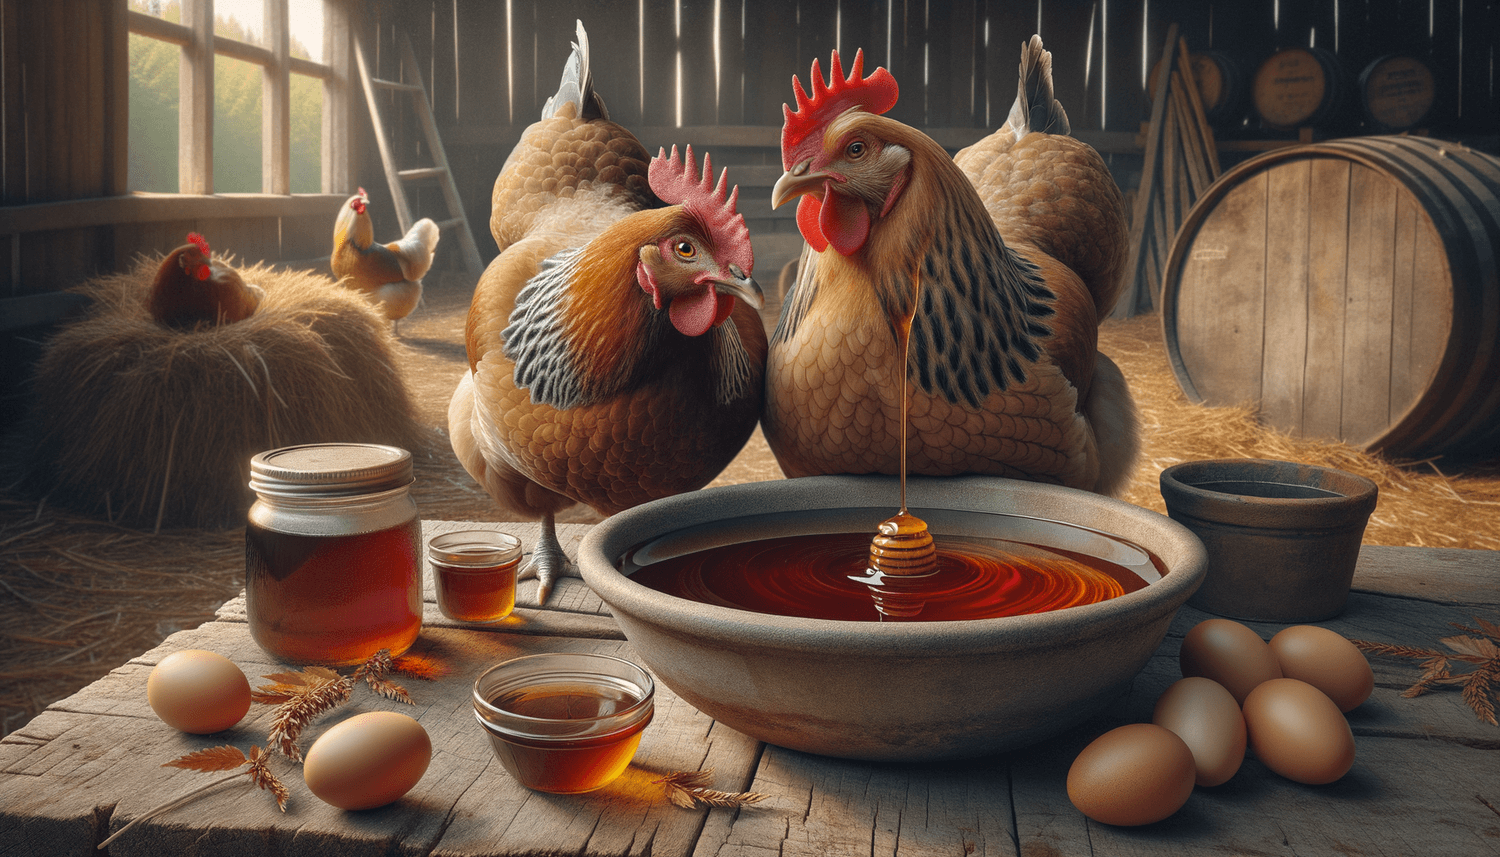 Can Chickens Eat Maple Syrup?